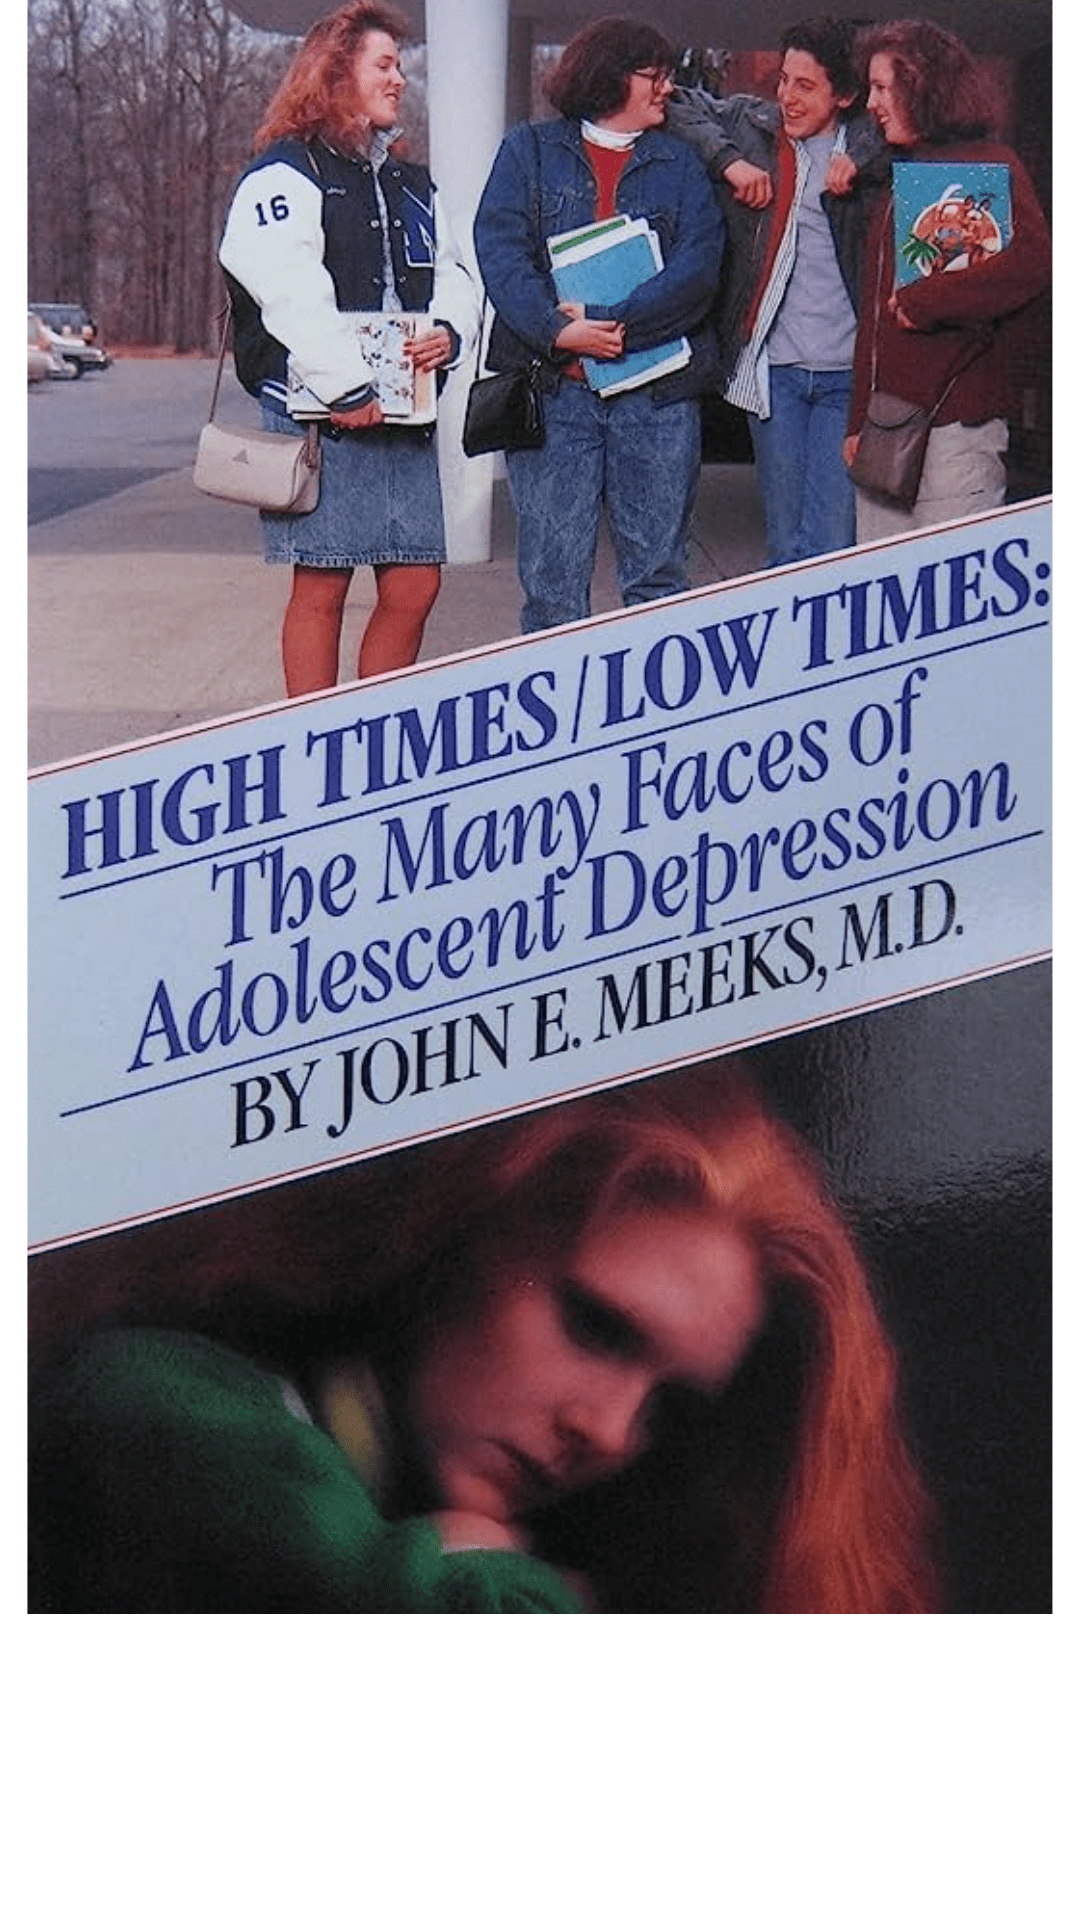 High Times/ Low Times The Many Faces of Adolescent Depression